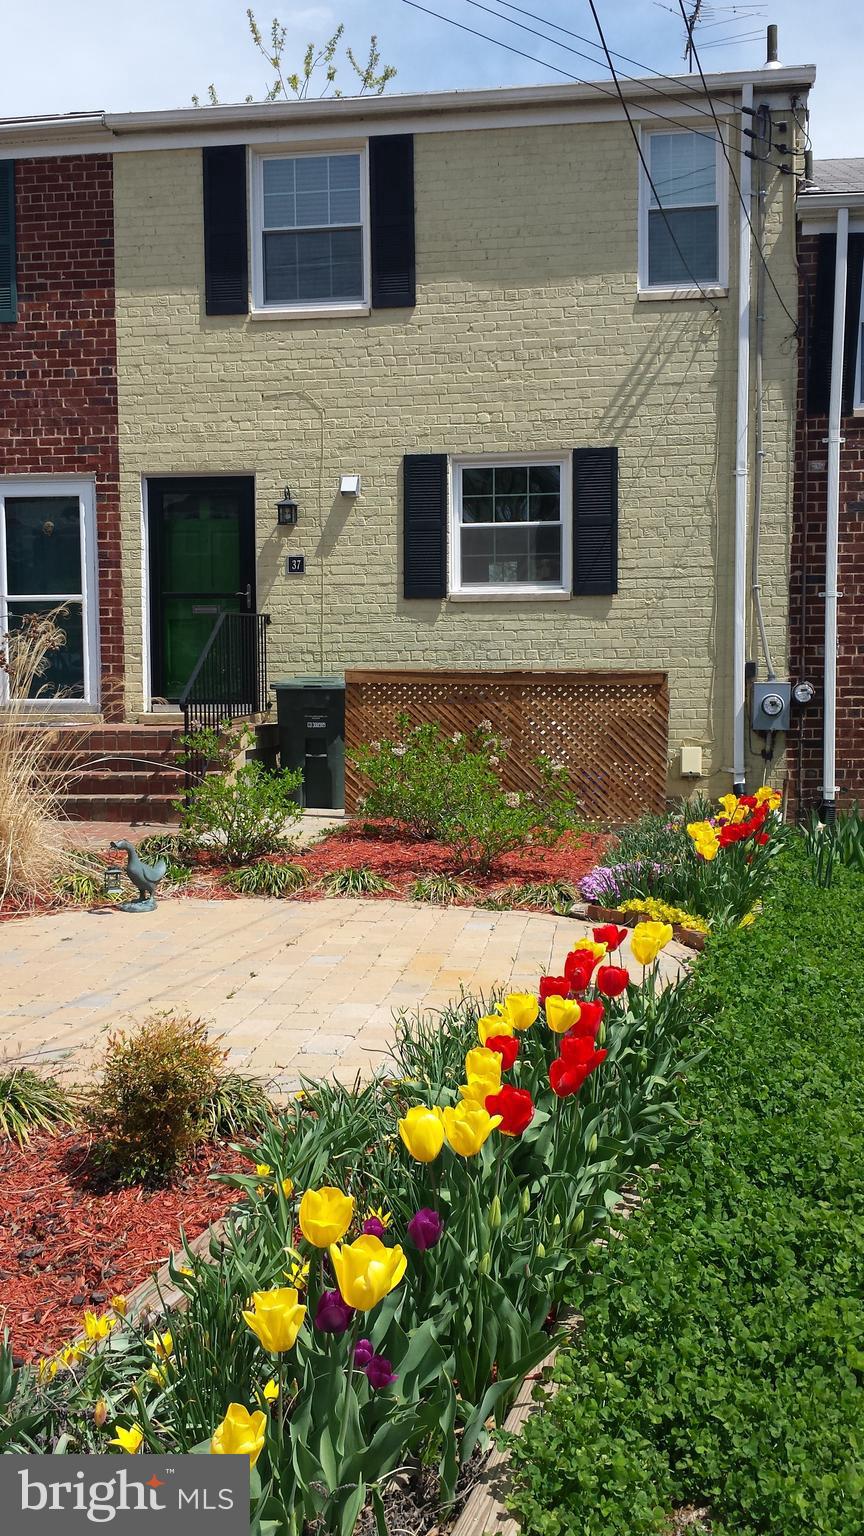 a front view of house and yard with beautiful flowers and green space